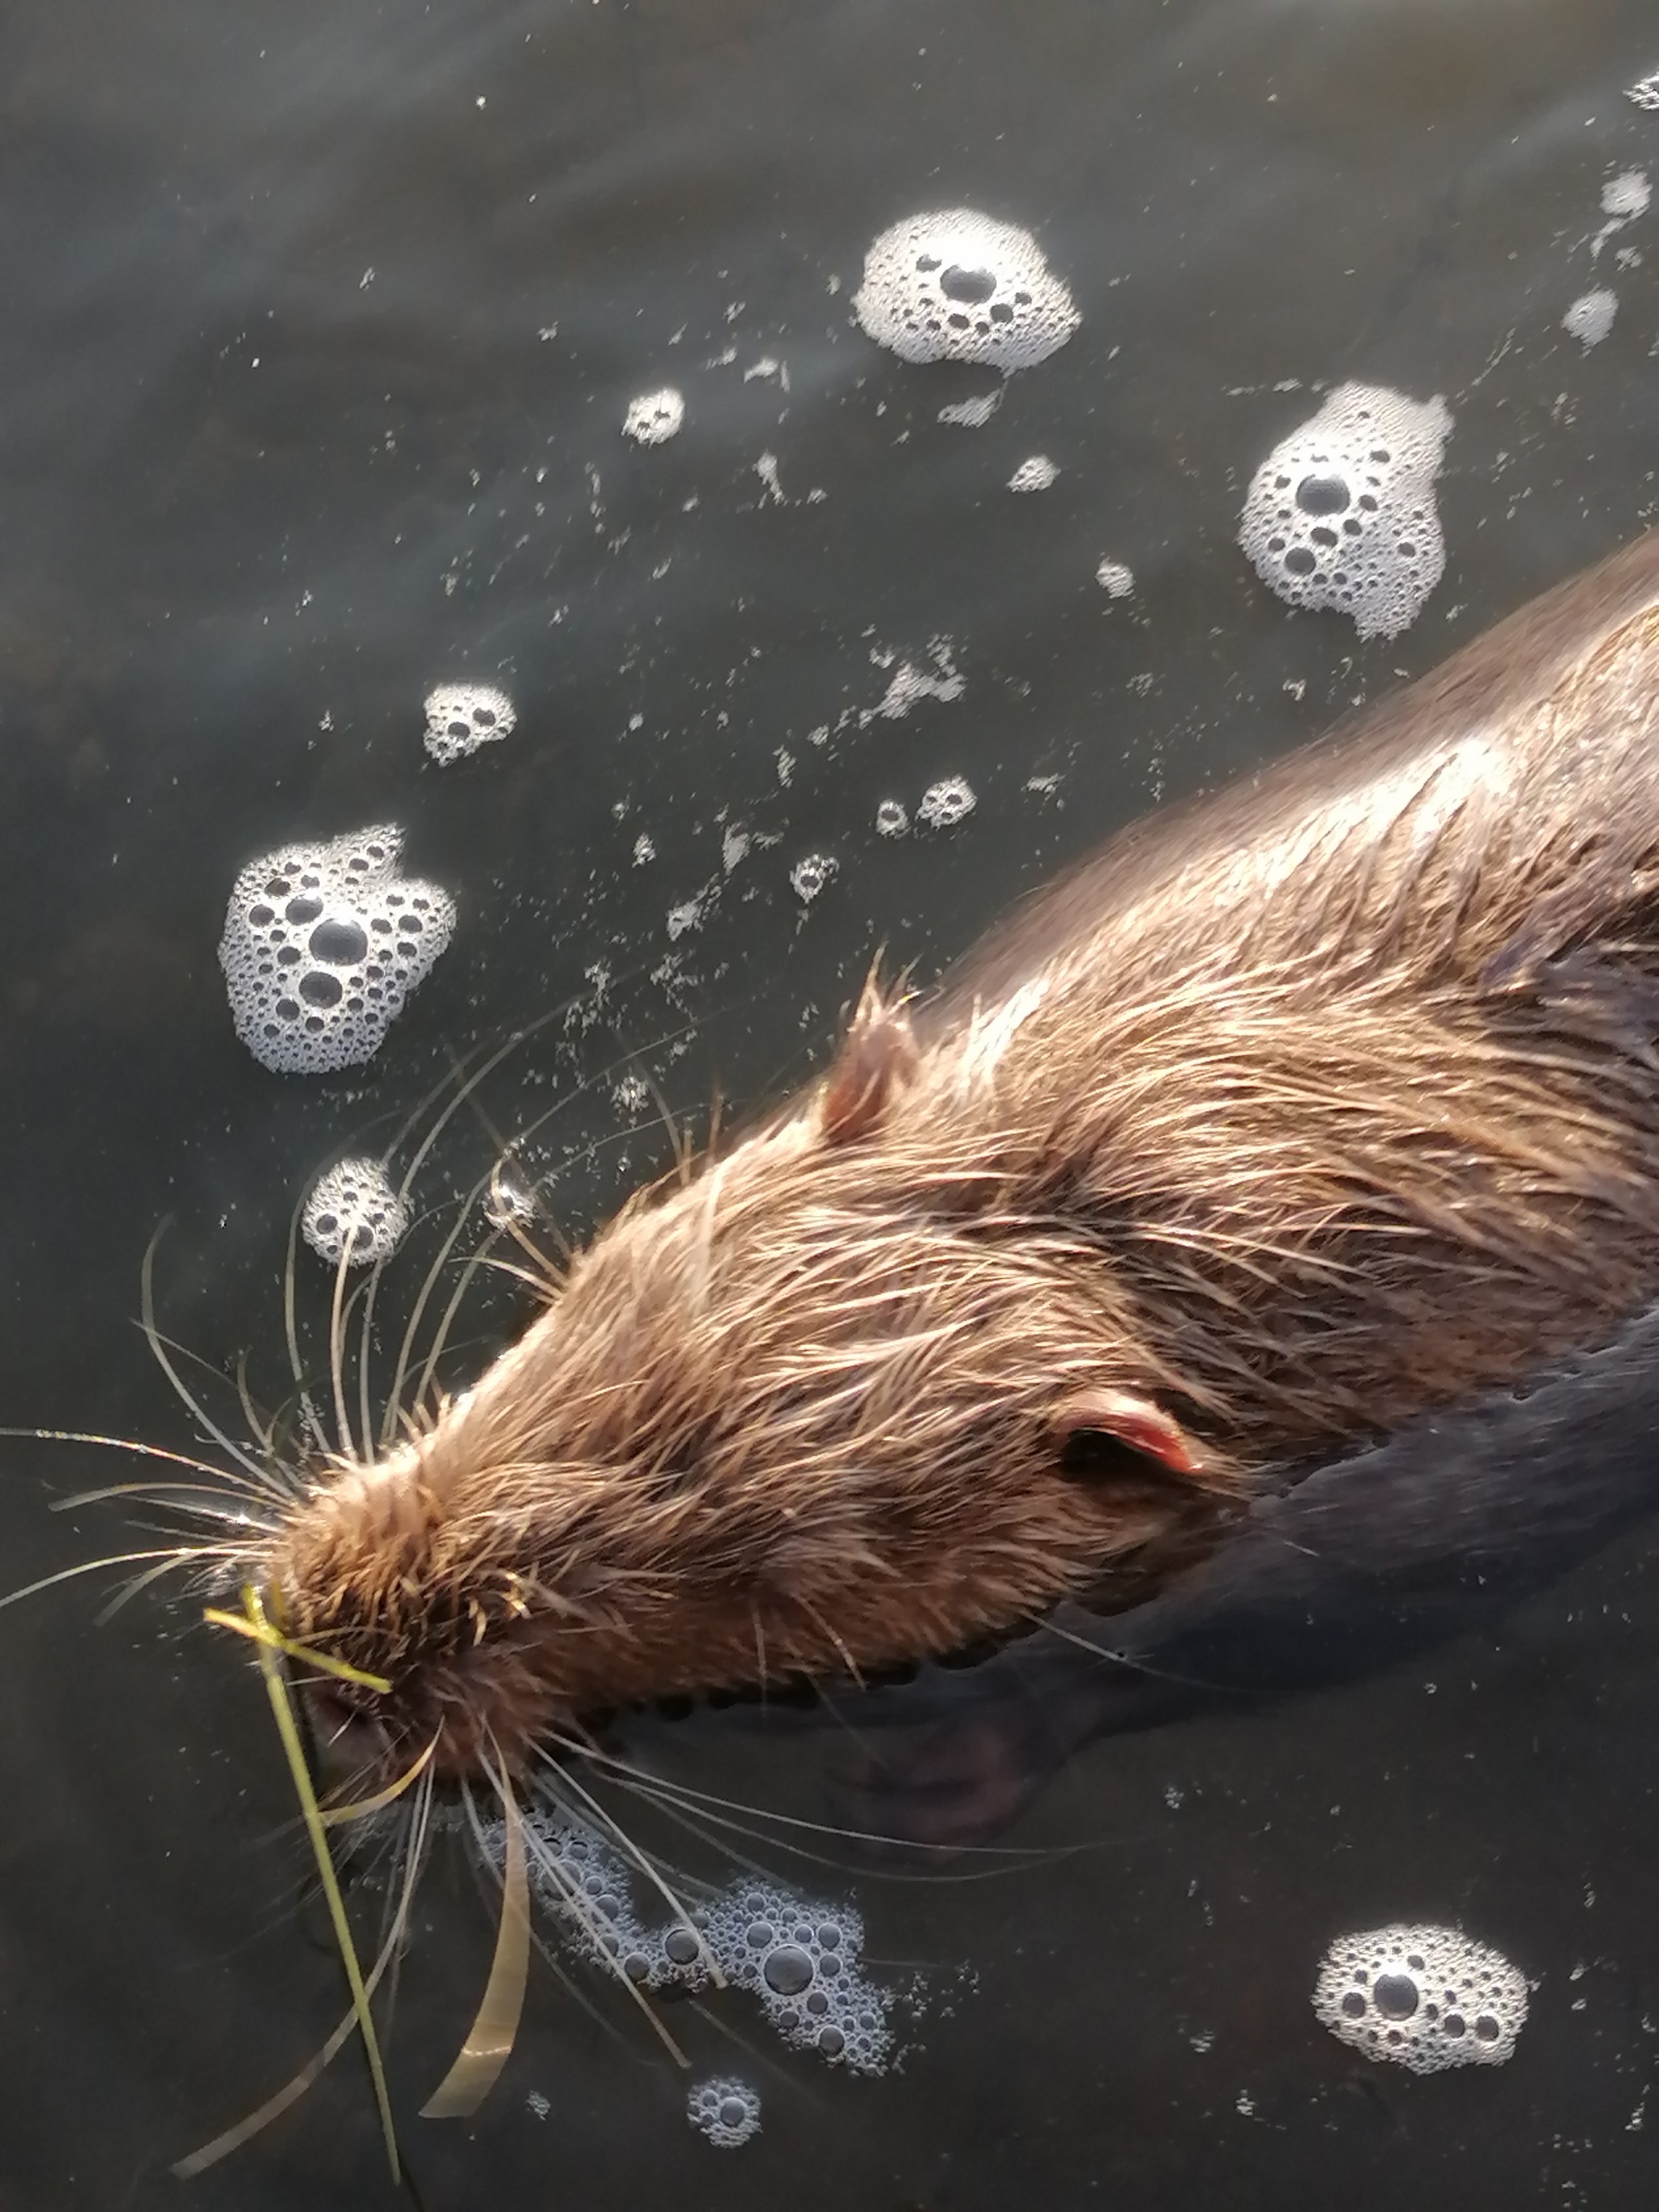 Today I met funny (muskrats?) in Berdyansk - My, Rodents, Berdyansk, Wild animals, Longpost, Who is this?